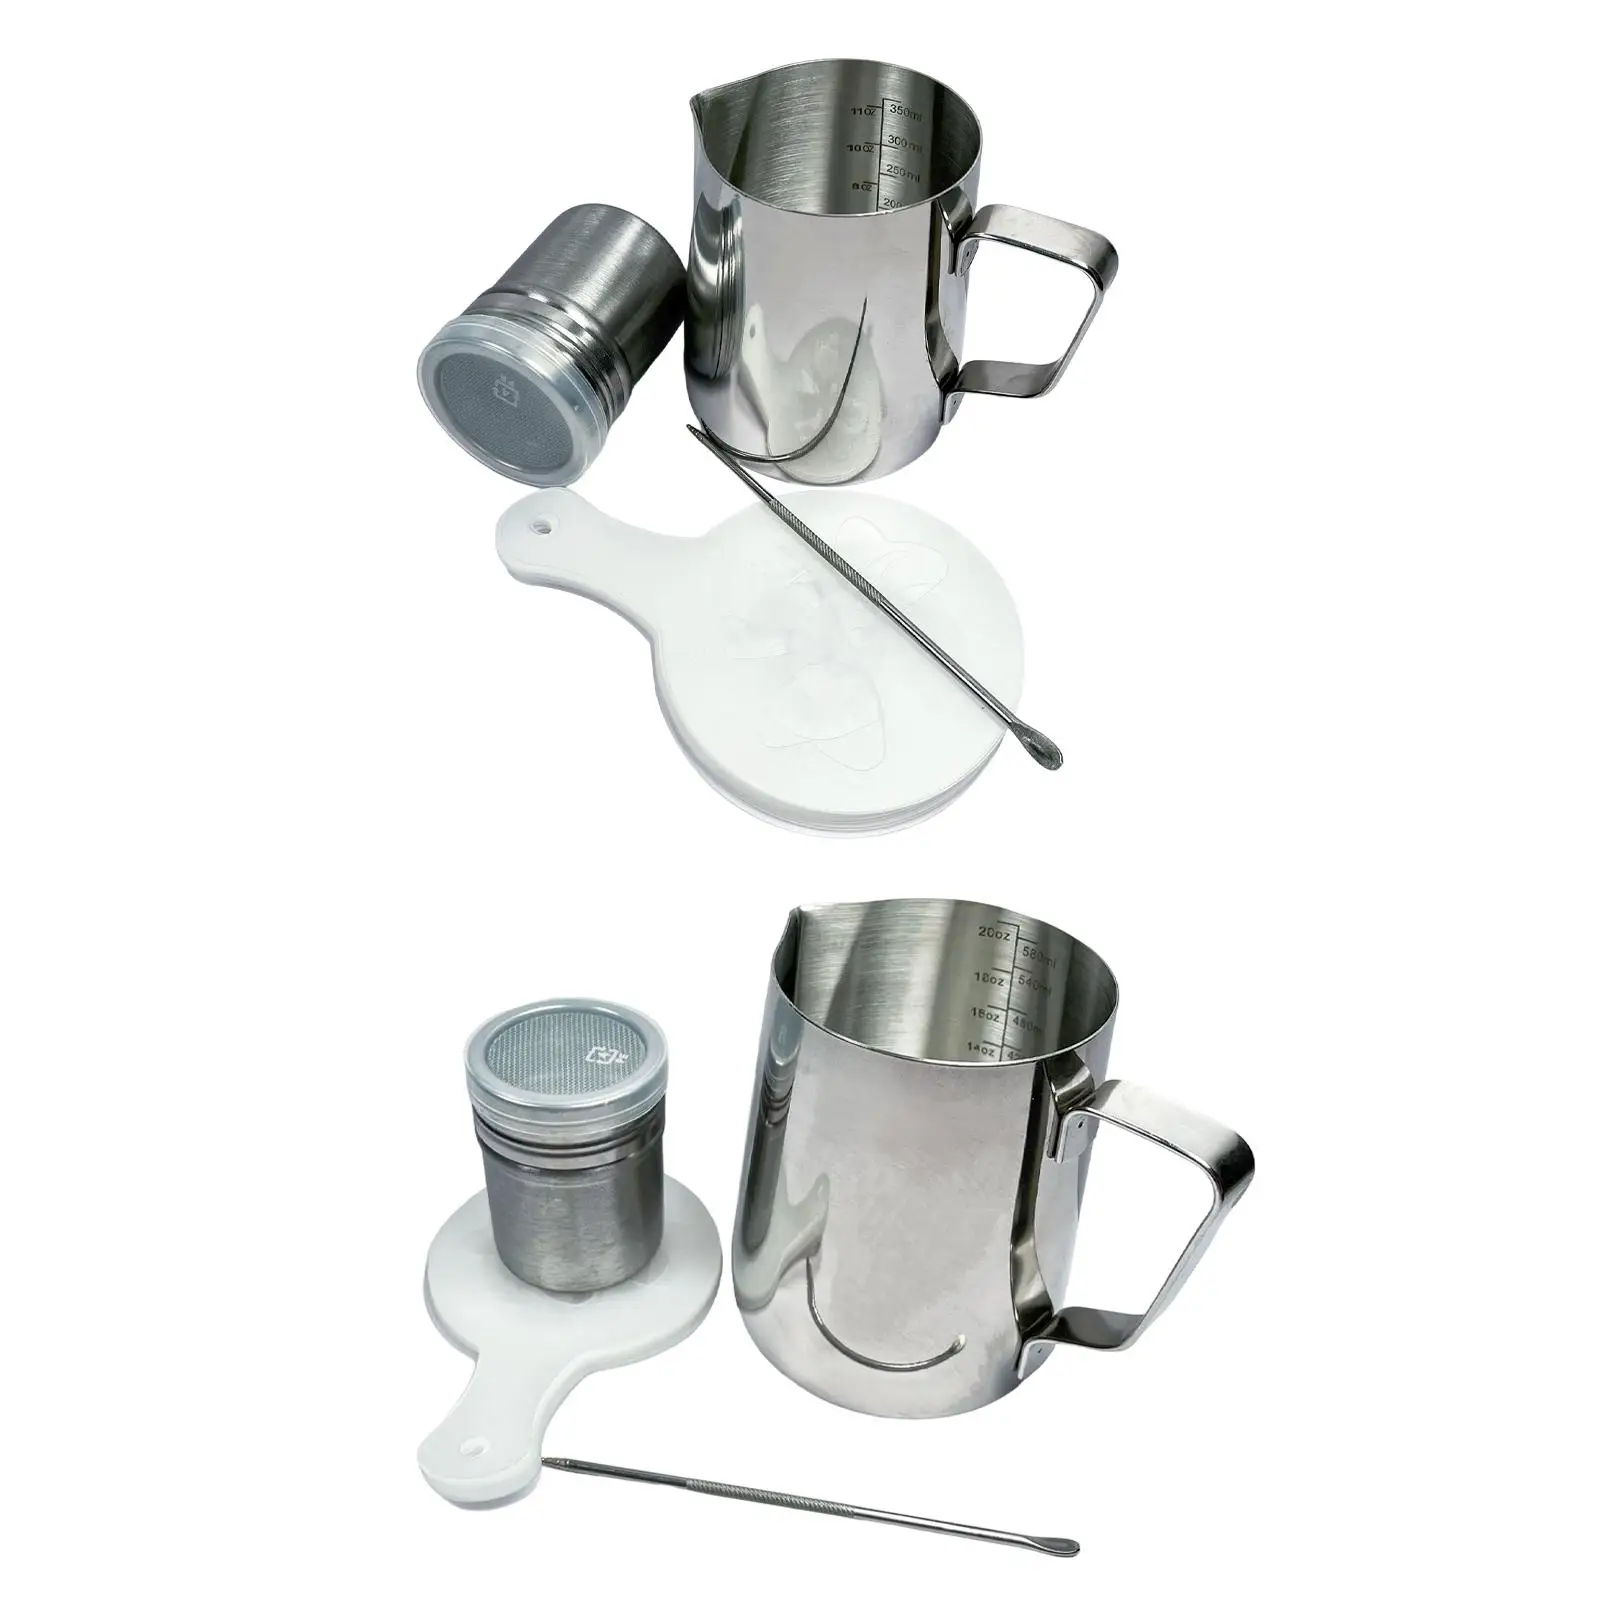 Stainless Steel Milk Frothing Mugs Frother Steamer Cup Espresso Steaming Cups Coffee Milk Frothing Jug Kitchen Cafe Home Kitchen